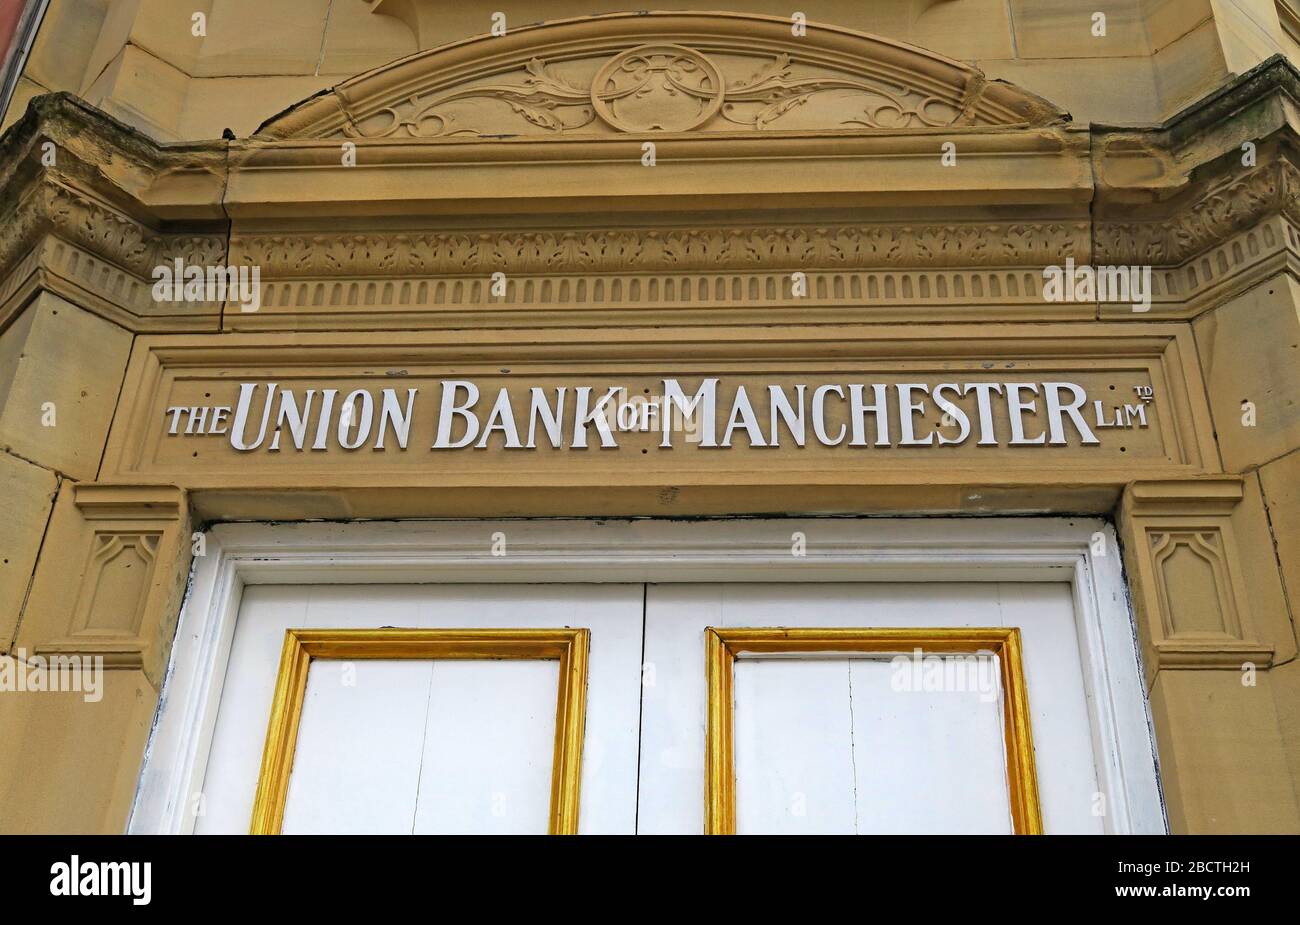 The Union Bank Of Manchester building, Bridge St, Stockport, Greater Manchester, Cheshire, England, UK - Now Barclays Stock Photo